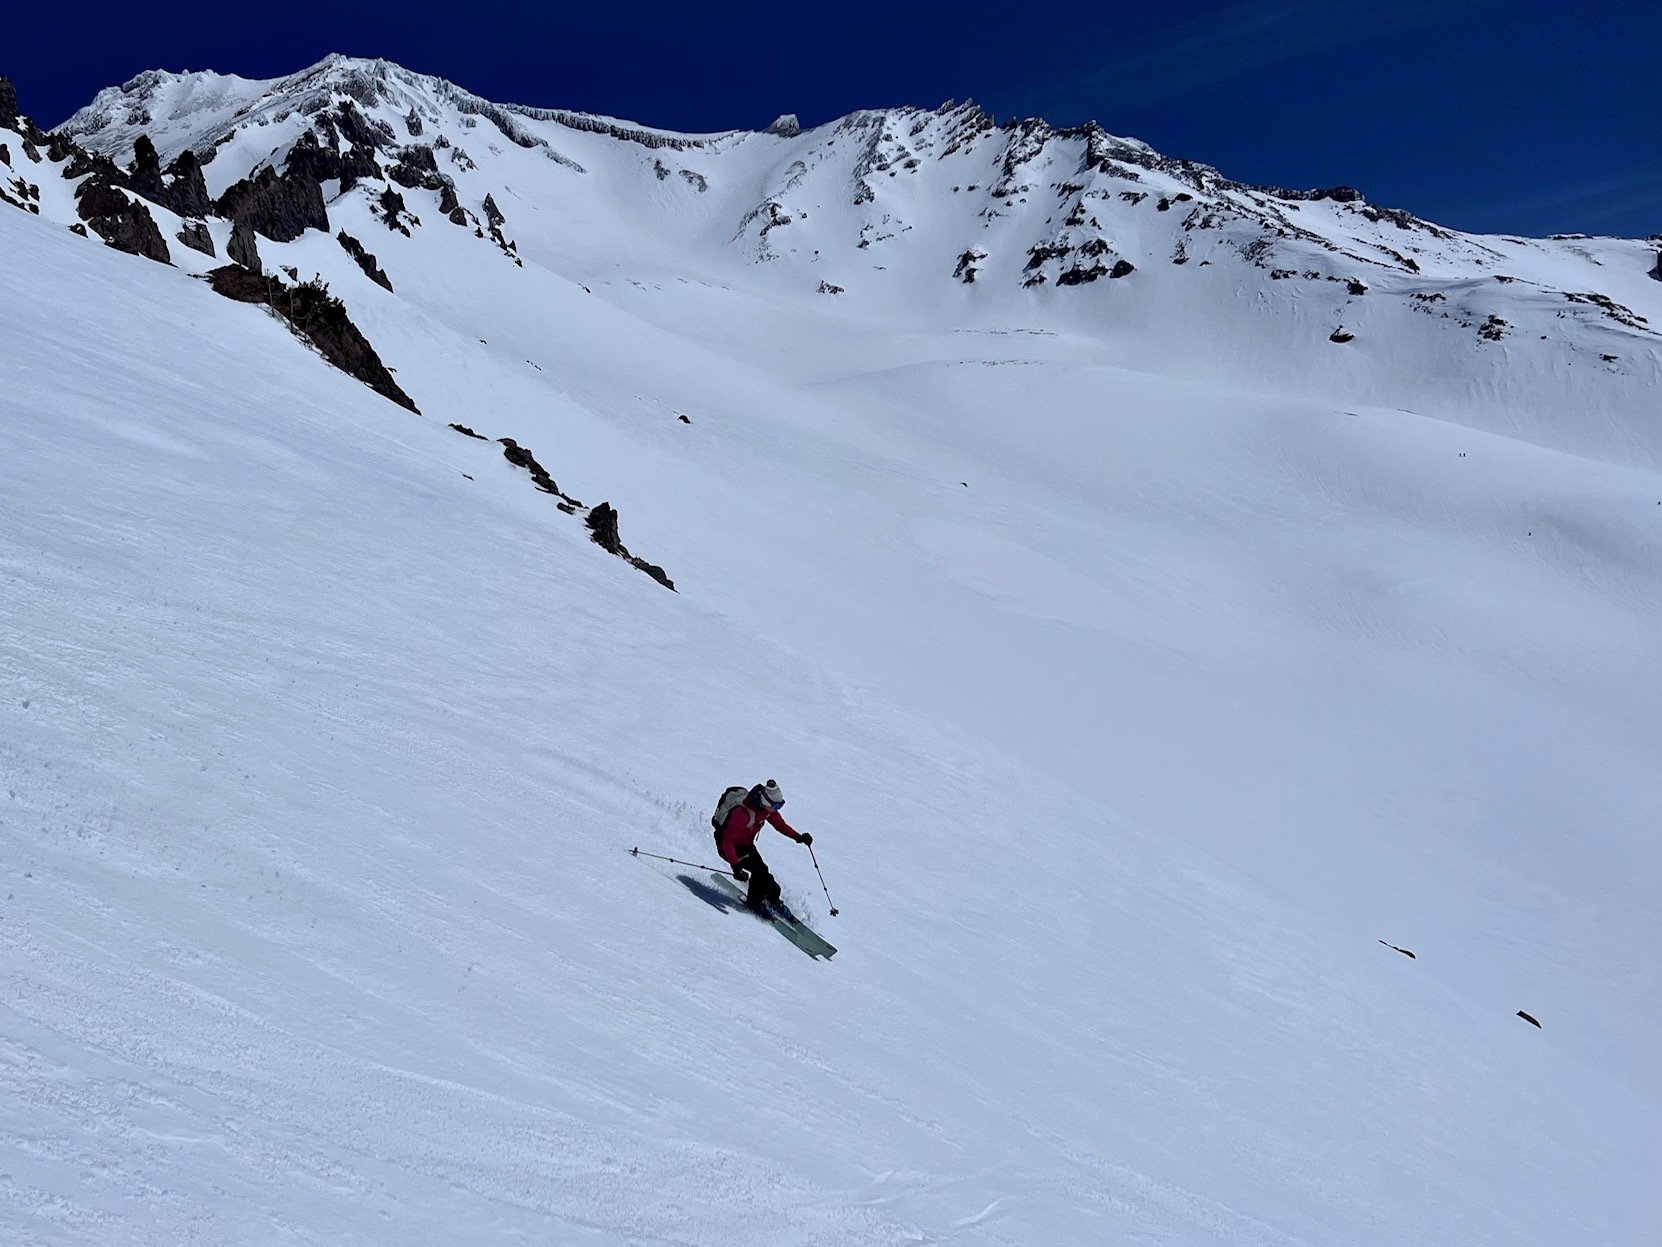 Sping skiing in the backcountry on mt shasta